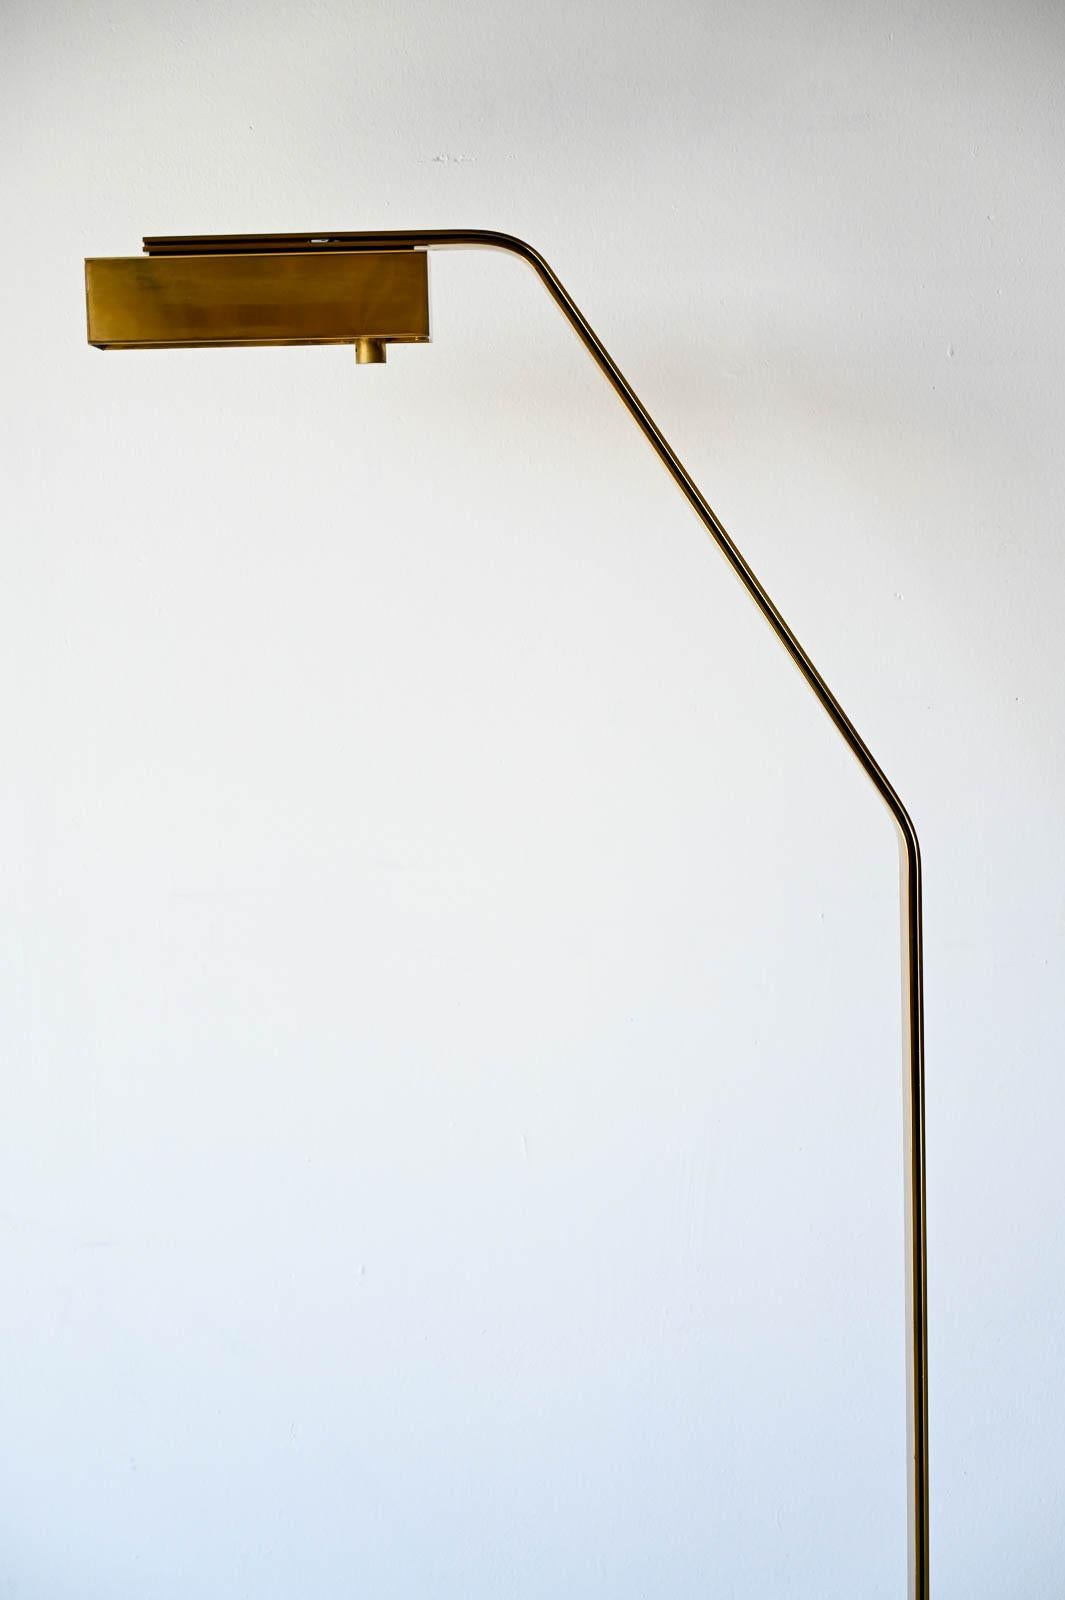 Brass Swing Arm Floor or Reading Lamp by Casella, ca. 1970.  Polished brass base with swivel arm neck and adjustable dimmable light.  Perfect reading lamp for a chair or end of sofa.  Very good vintage condition, this is a beautiful lamp for your